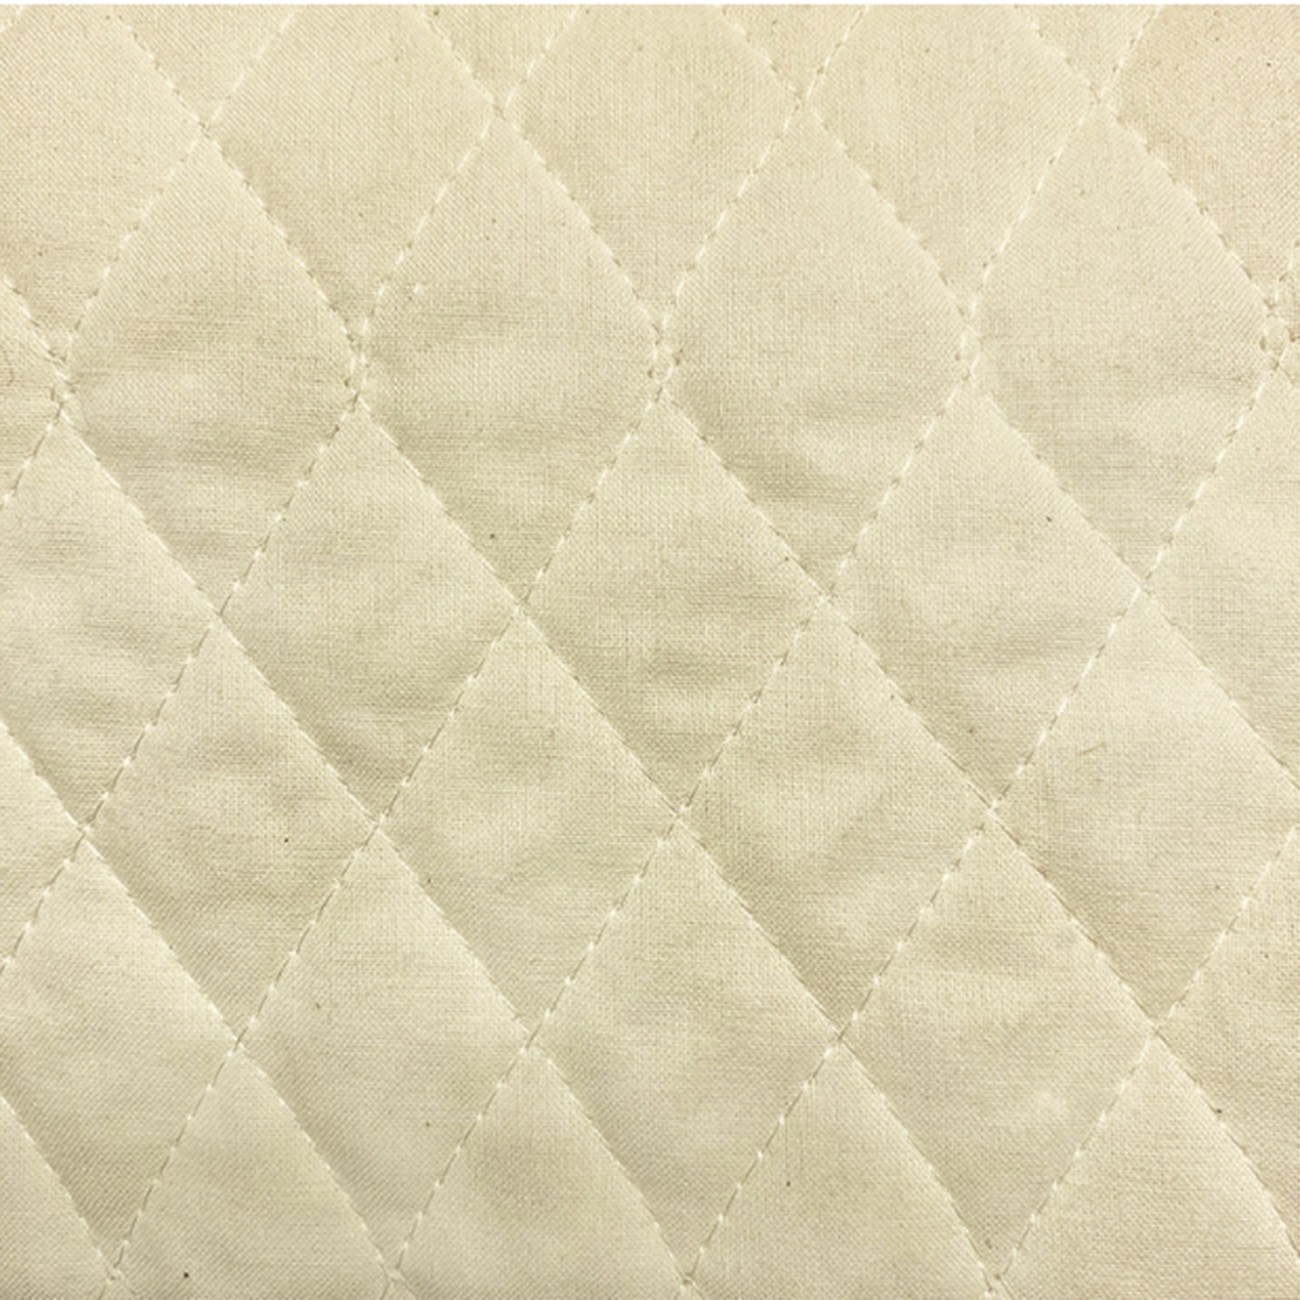 Natural Quilted Cotton Muslin 2.5oz B. Polyester, Tricot Back